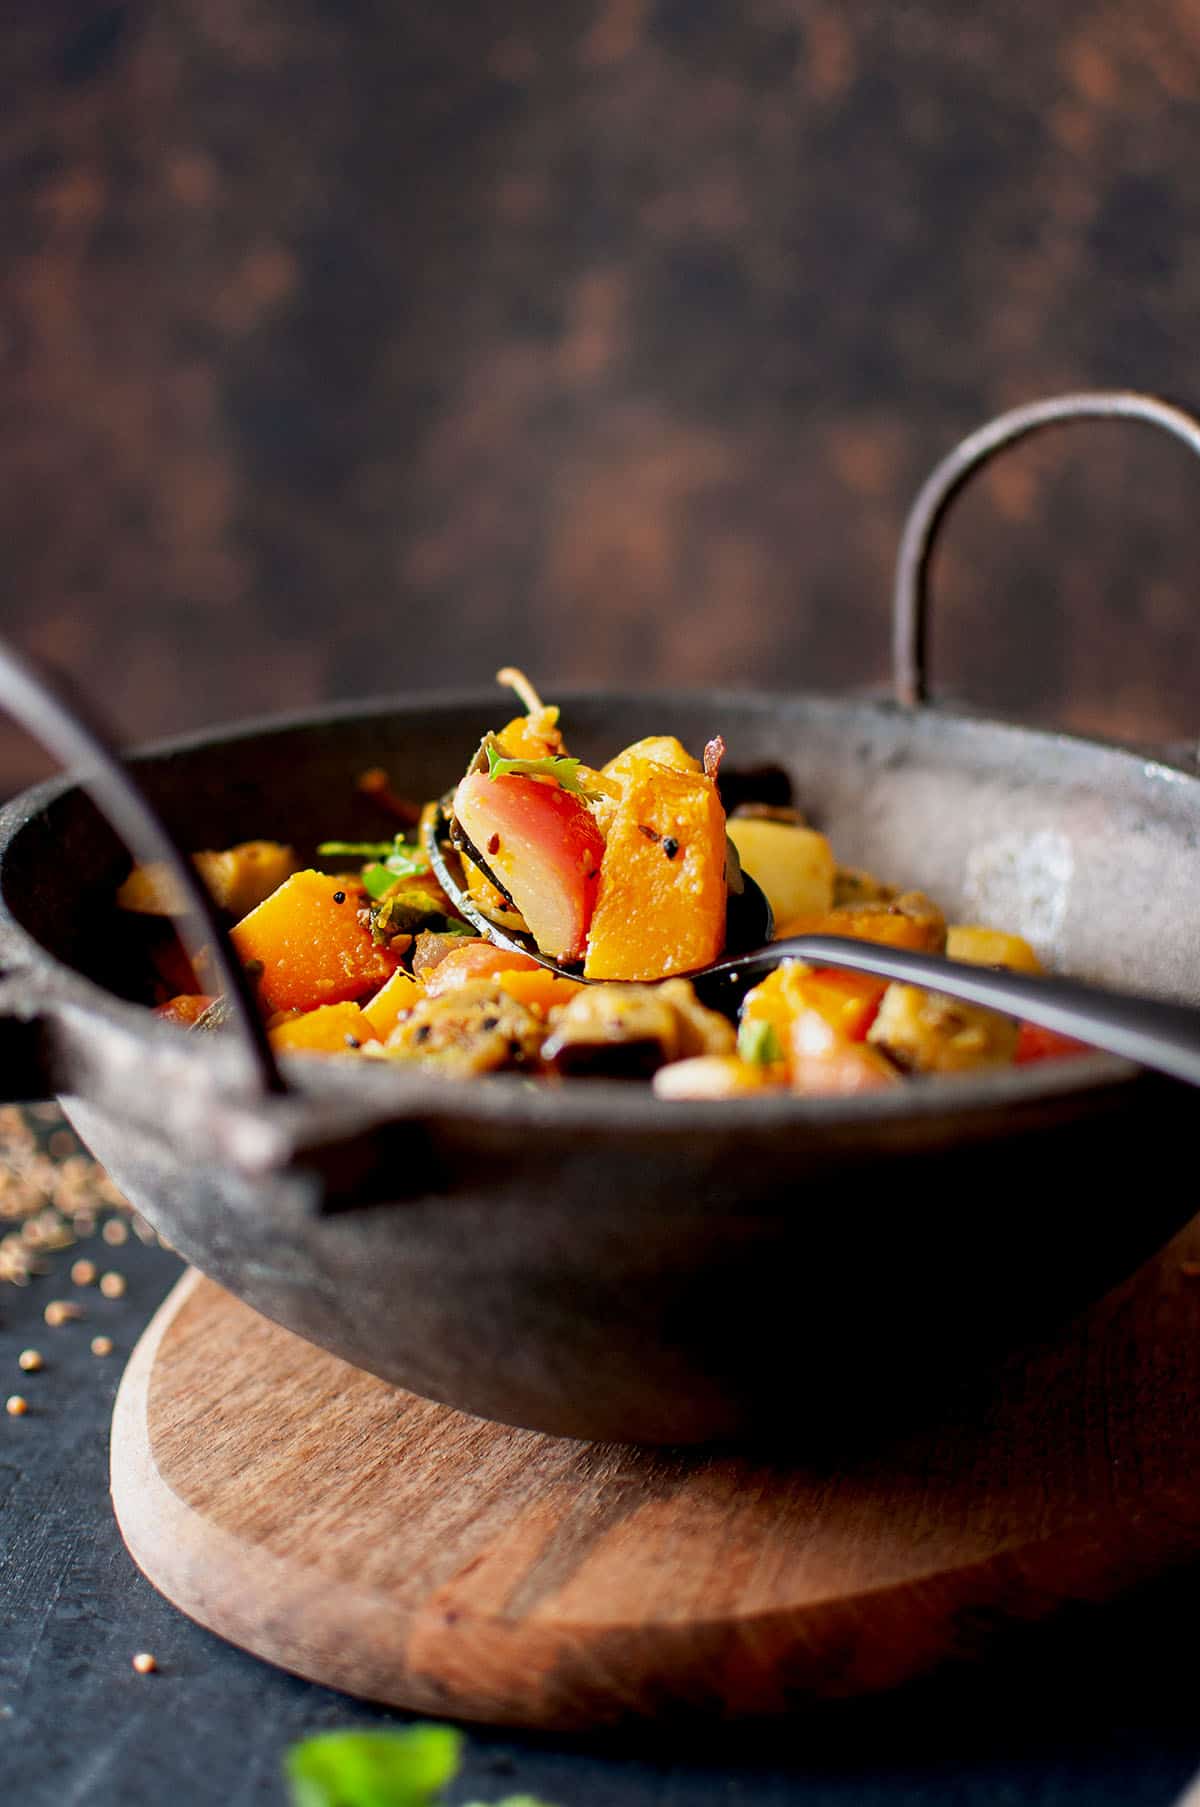 Wok with mix vegetable curry.